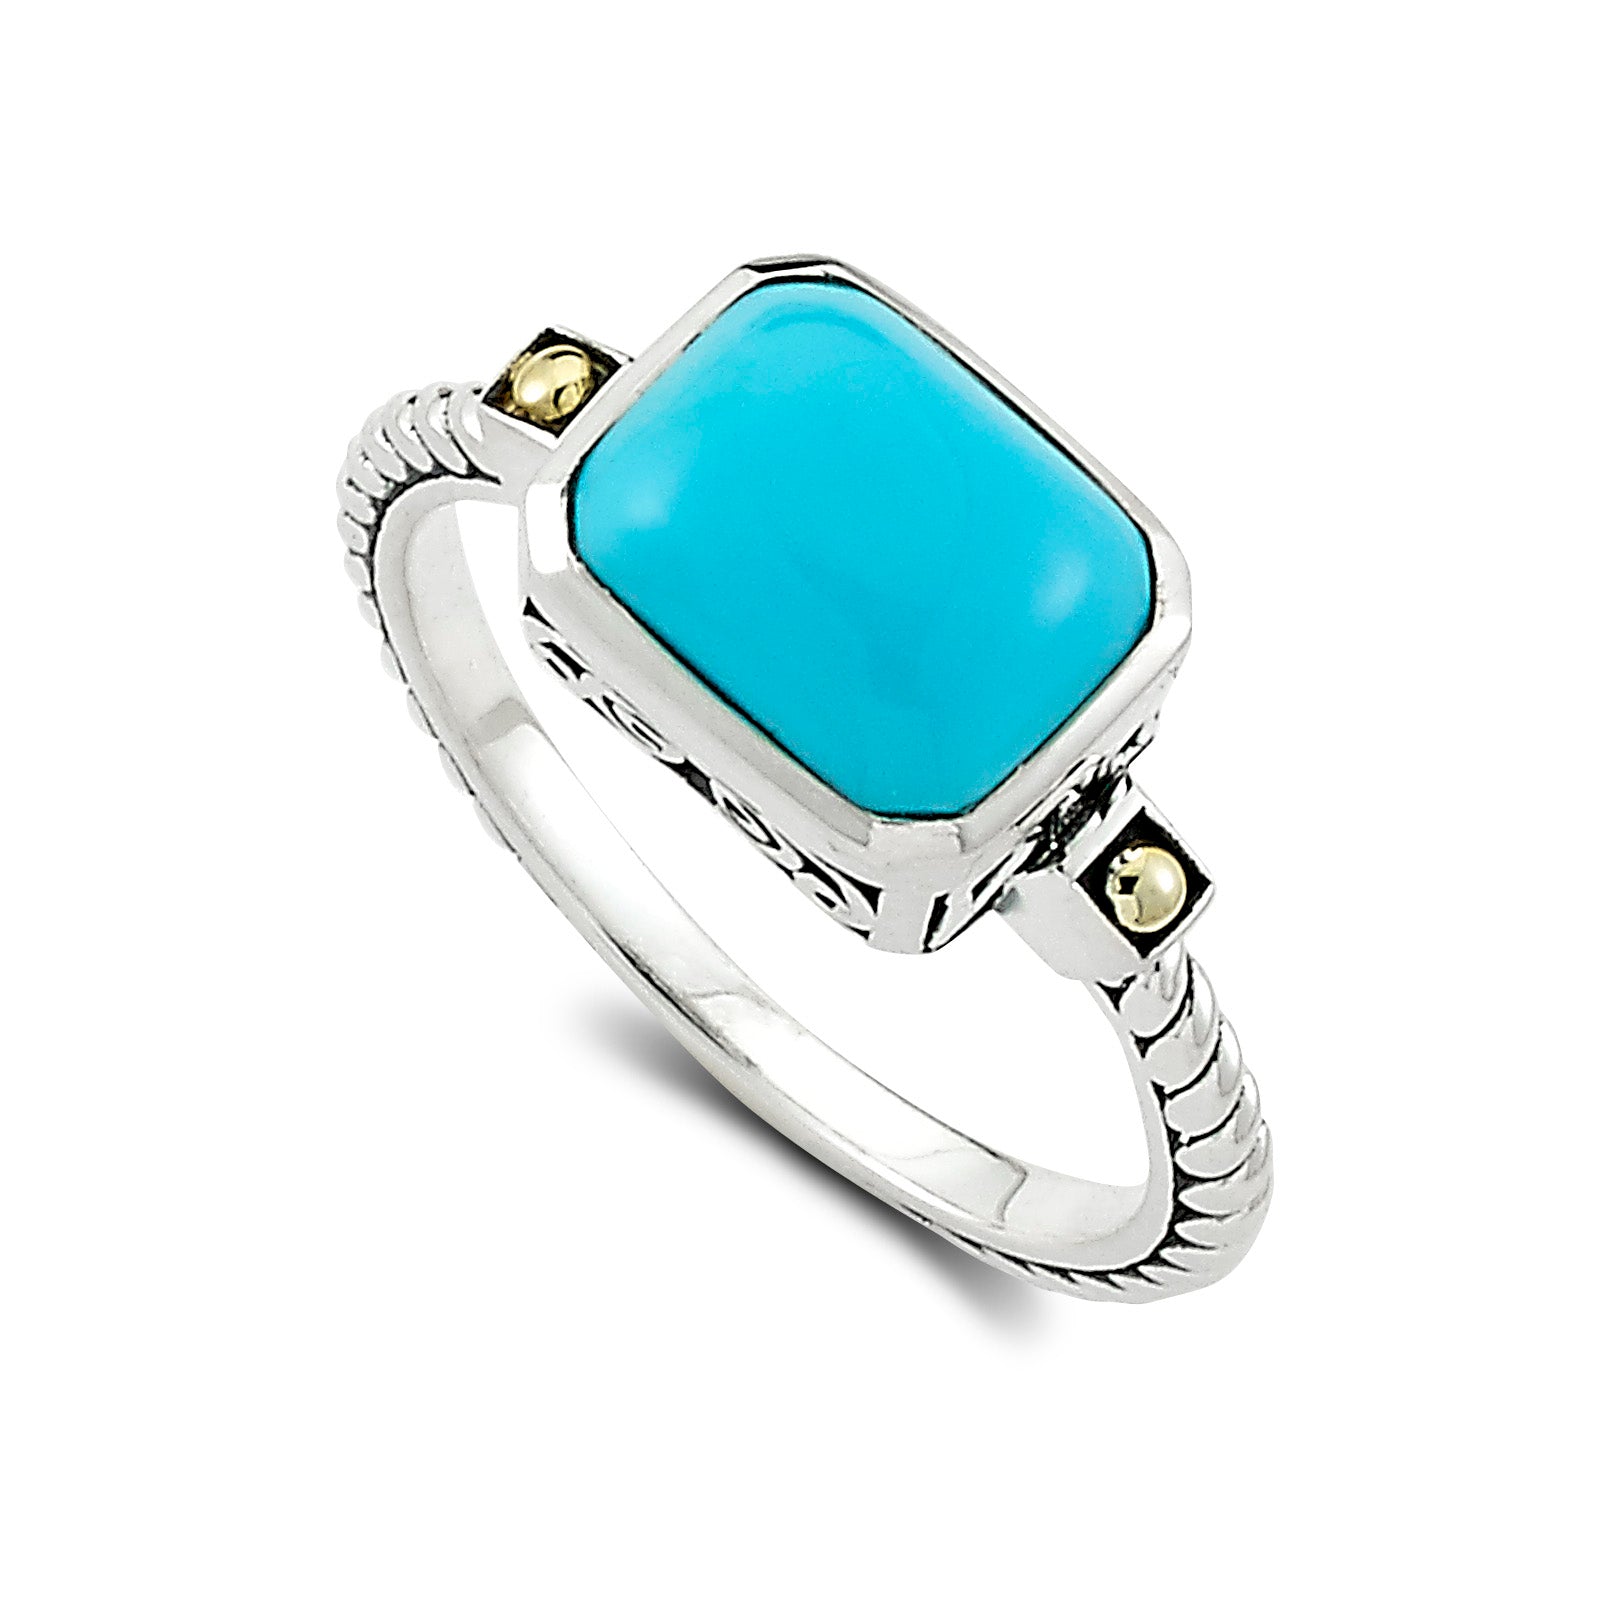 Samuel B. Sterling Silver & 18K Yellow Gold Sleeping Beauty Turquoise Cabochon Ring